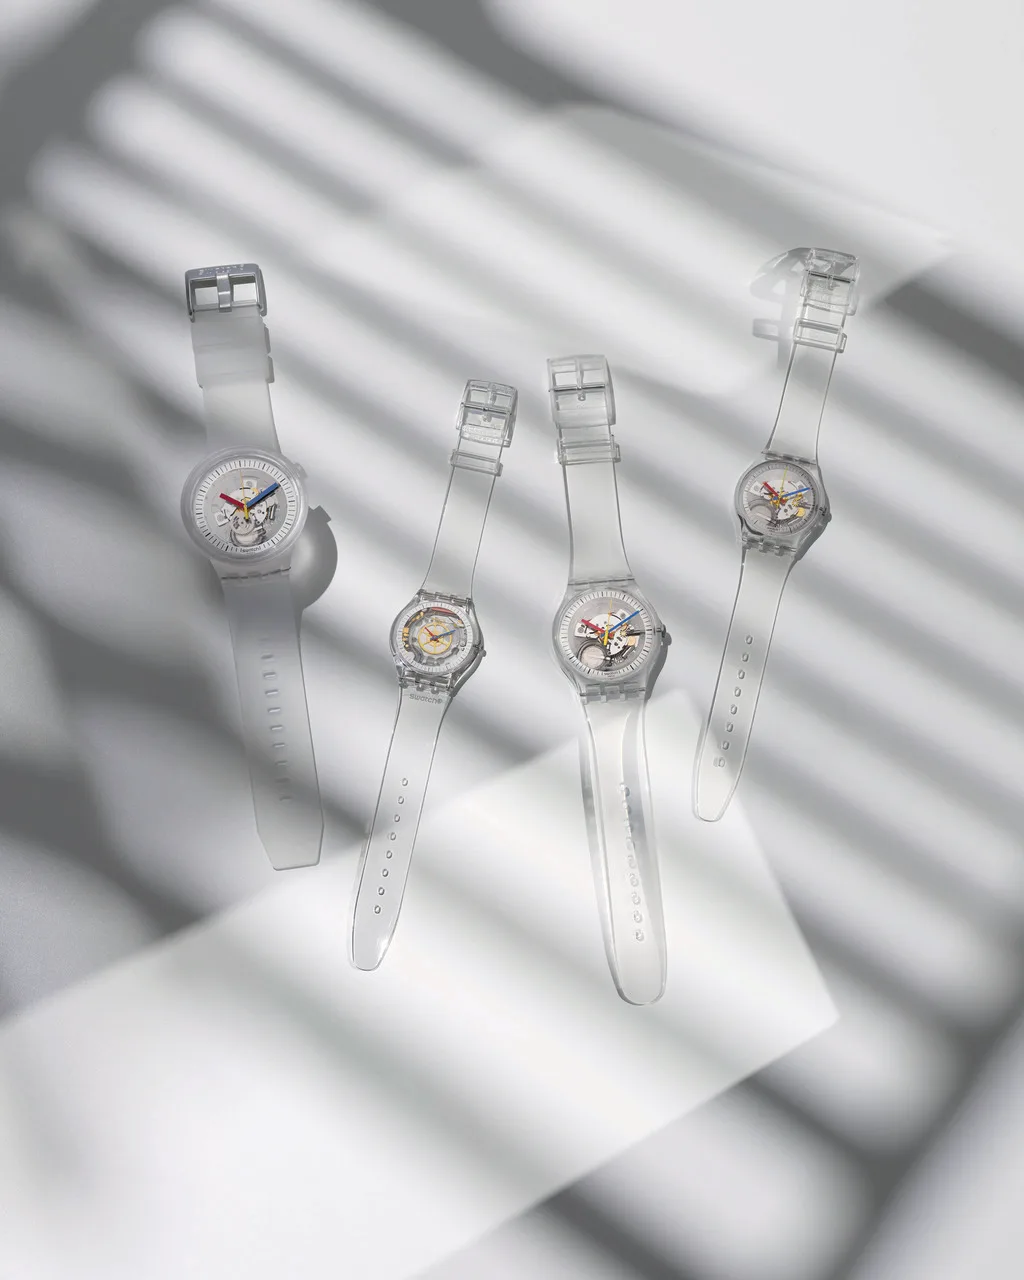 Swatch starts the new year with clear intentions